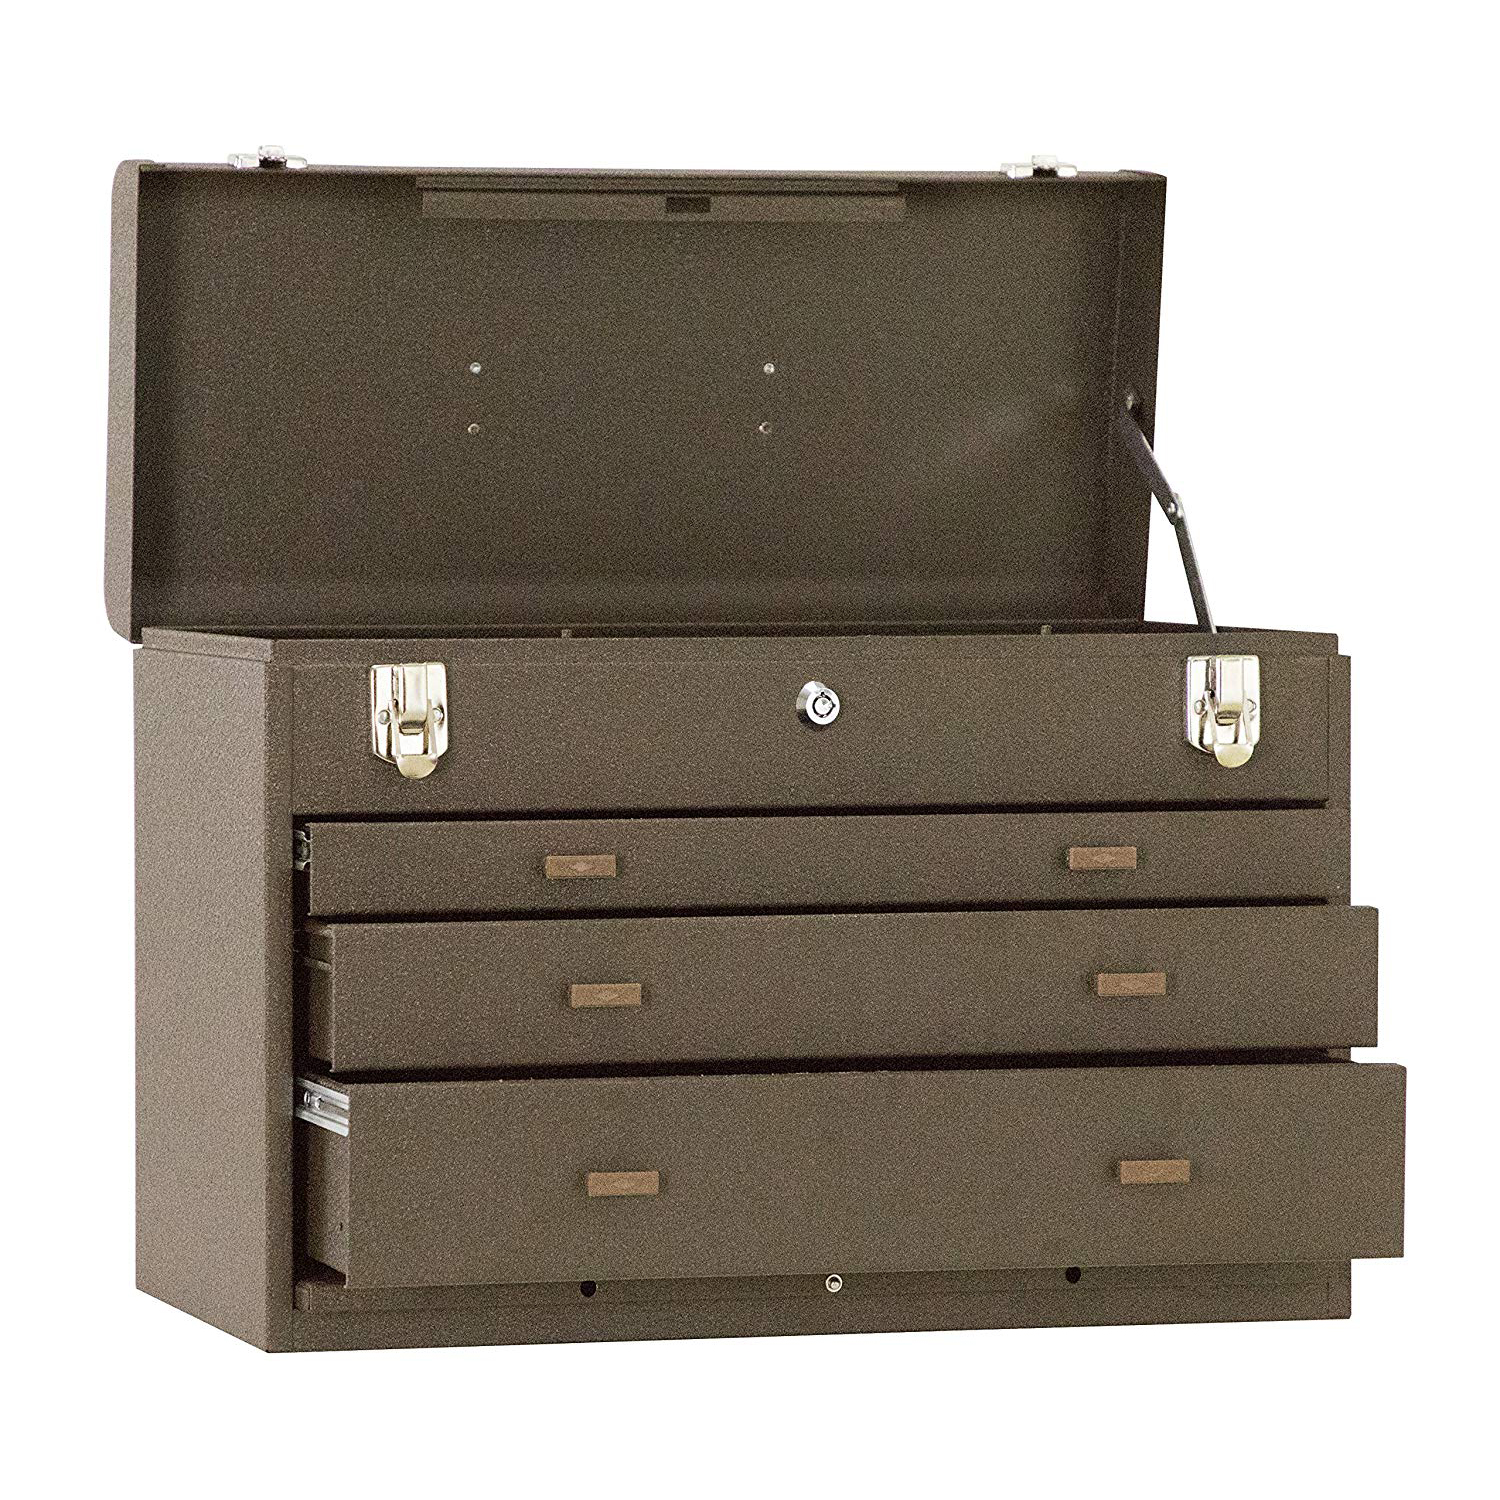 MACHINIST CHEST 20in 620B 3-DRAWER BROWN WRINKLE